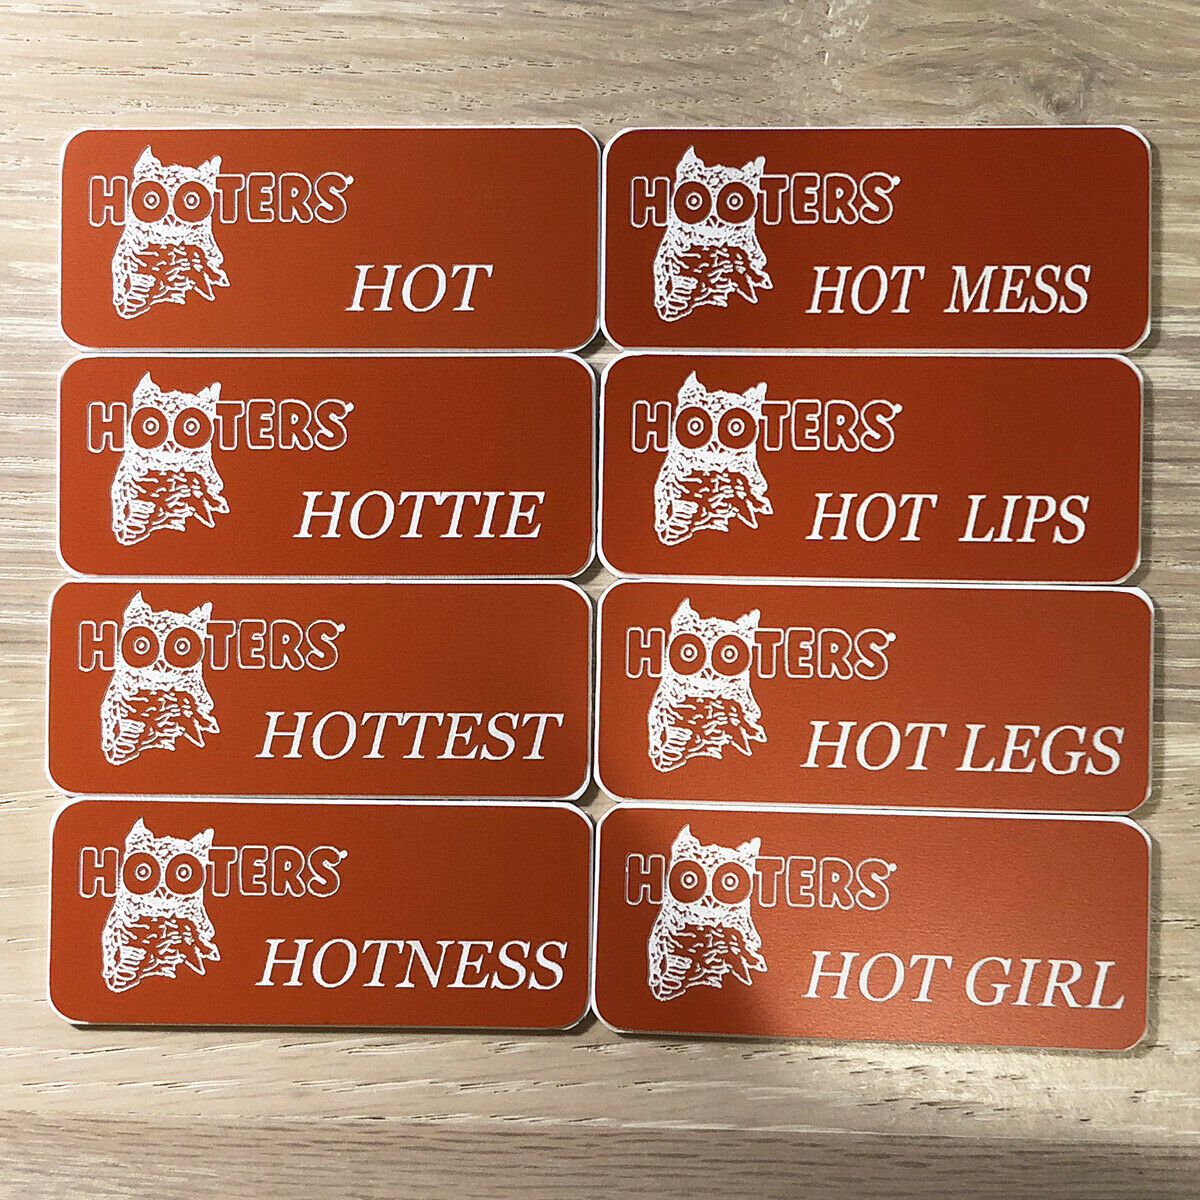 Hooters Name Tag Collectible Uniform Costume Dress Up Pick Hot Hottie Hotness